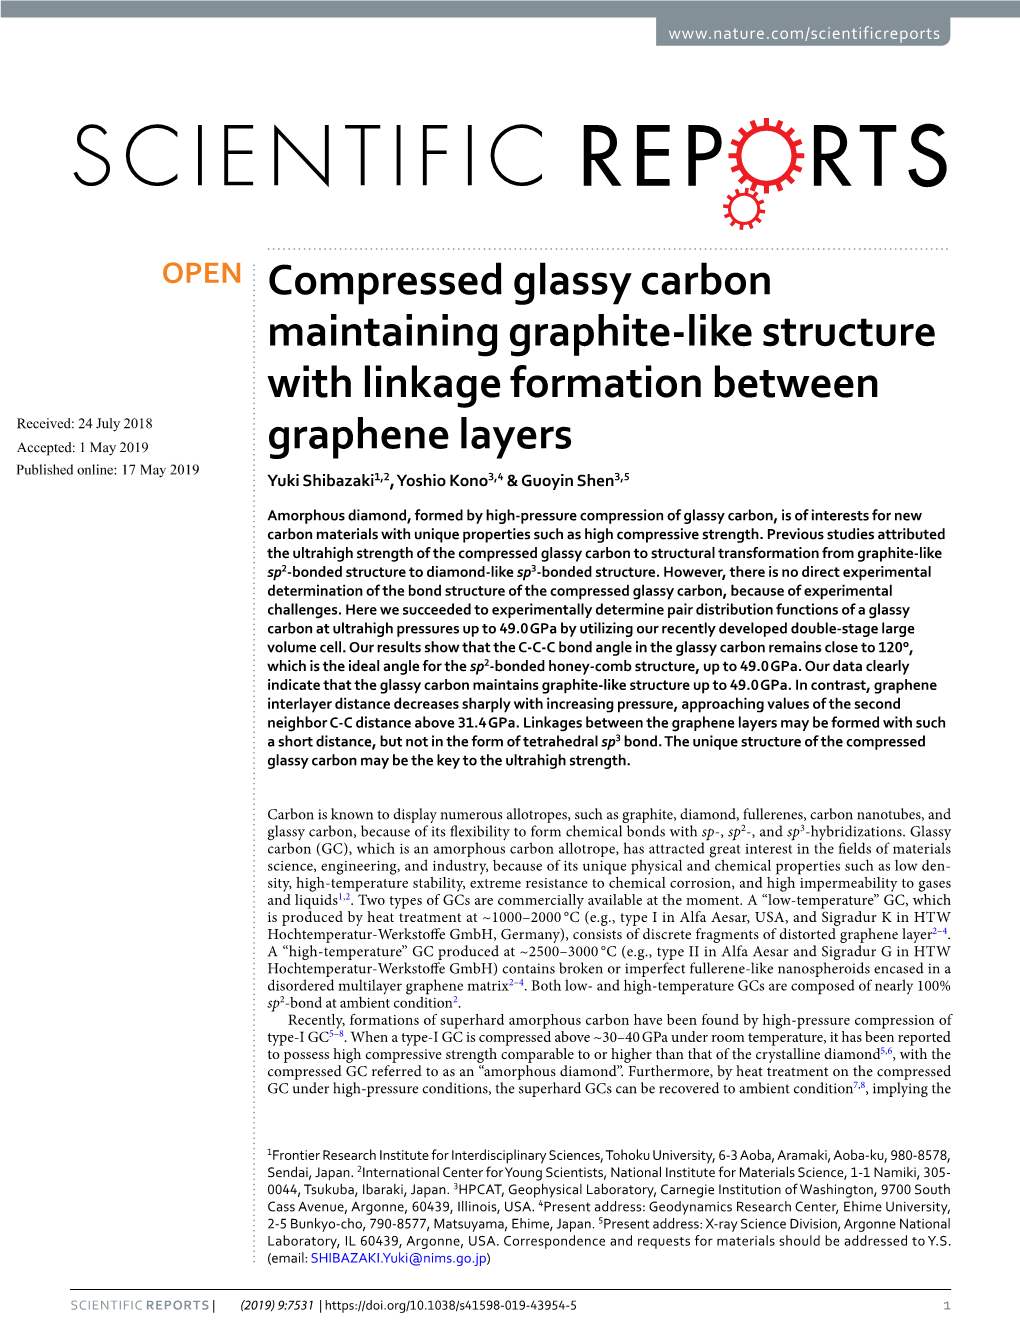 Compressed Glassy Carbon Maintaining Graphite-Like Structure